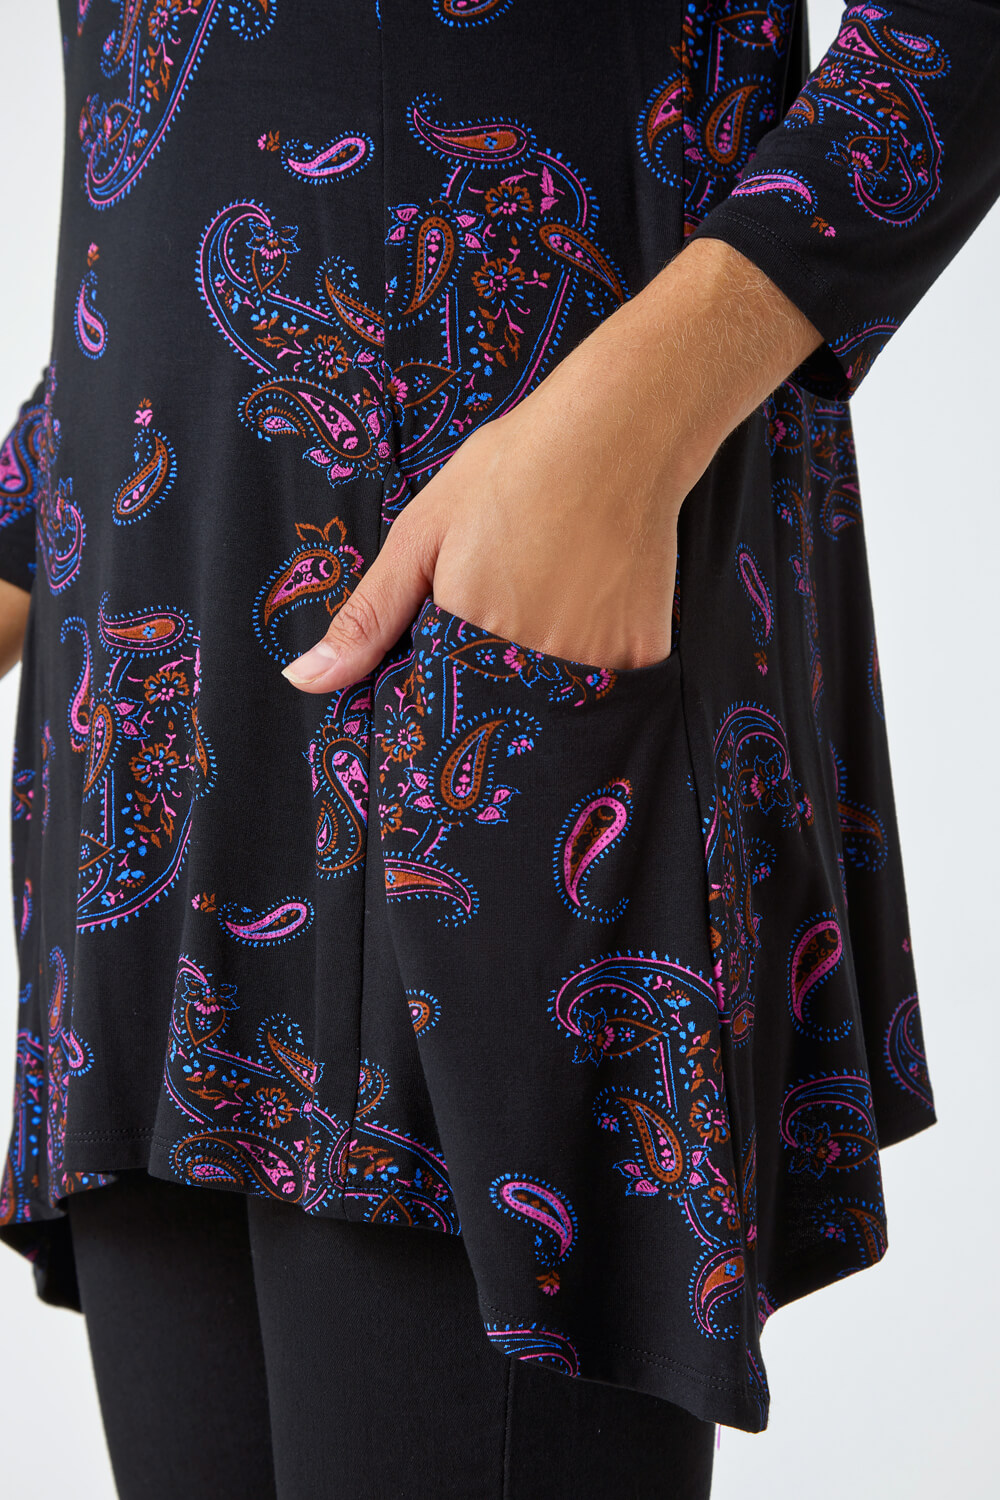 Purple Paisley Pocket Detail Stretch Swing Top, Image 5 of 5